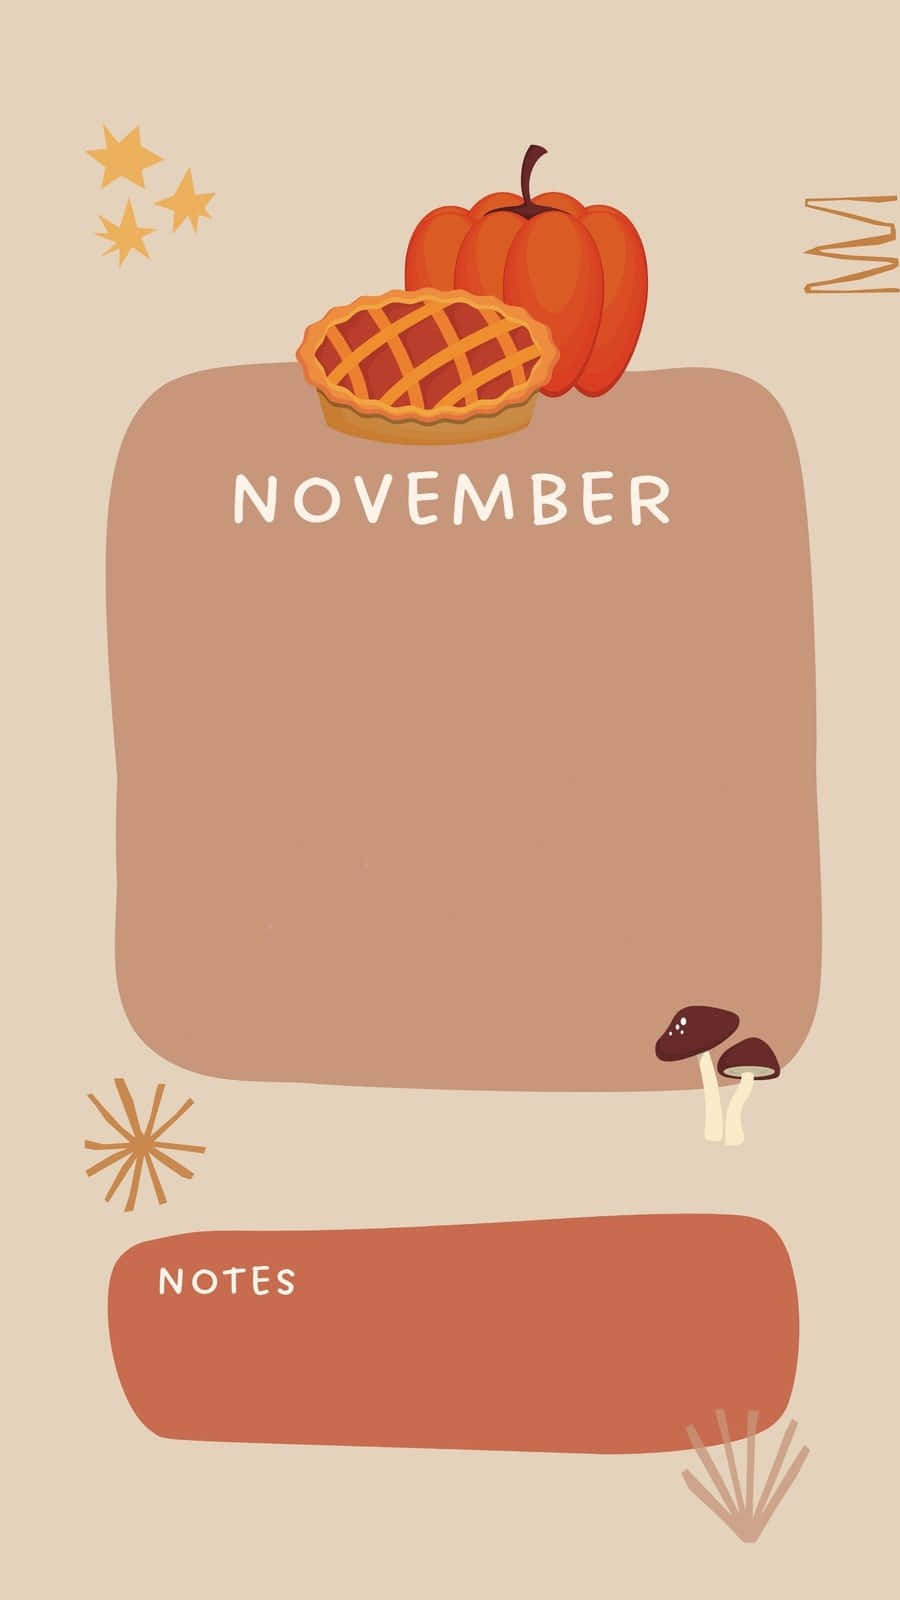 "Welcome November with Aesthetic Joy" Wallpaper